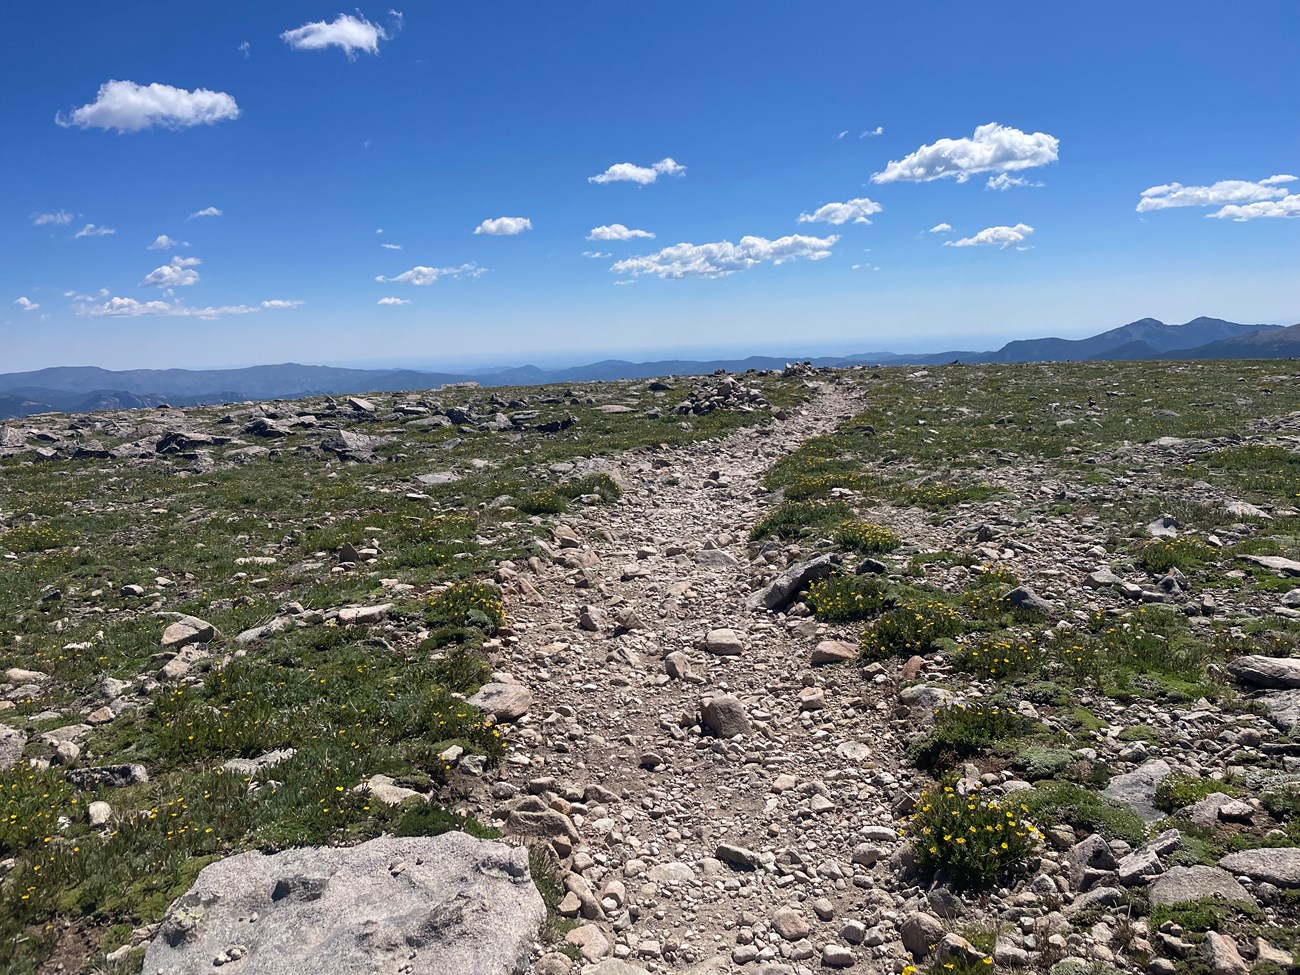 View of the Flattop Mountain Trail near the summit with tundra wildflowers growing